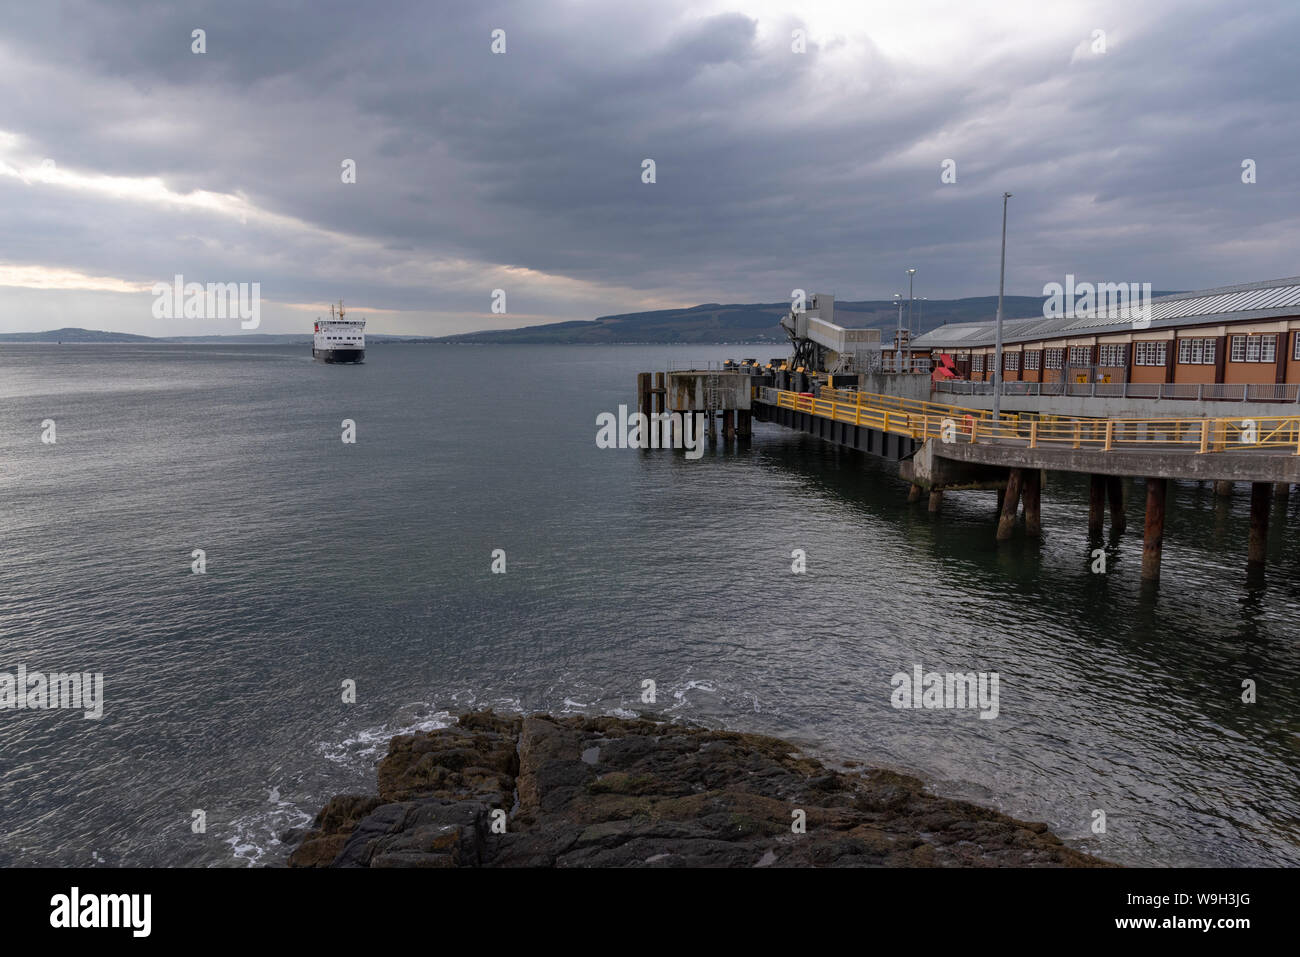 A CalMac ferry operating on the Rothesay to Wemyss Bay crossing. Stock Photo